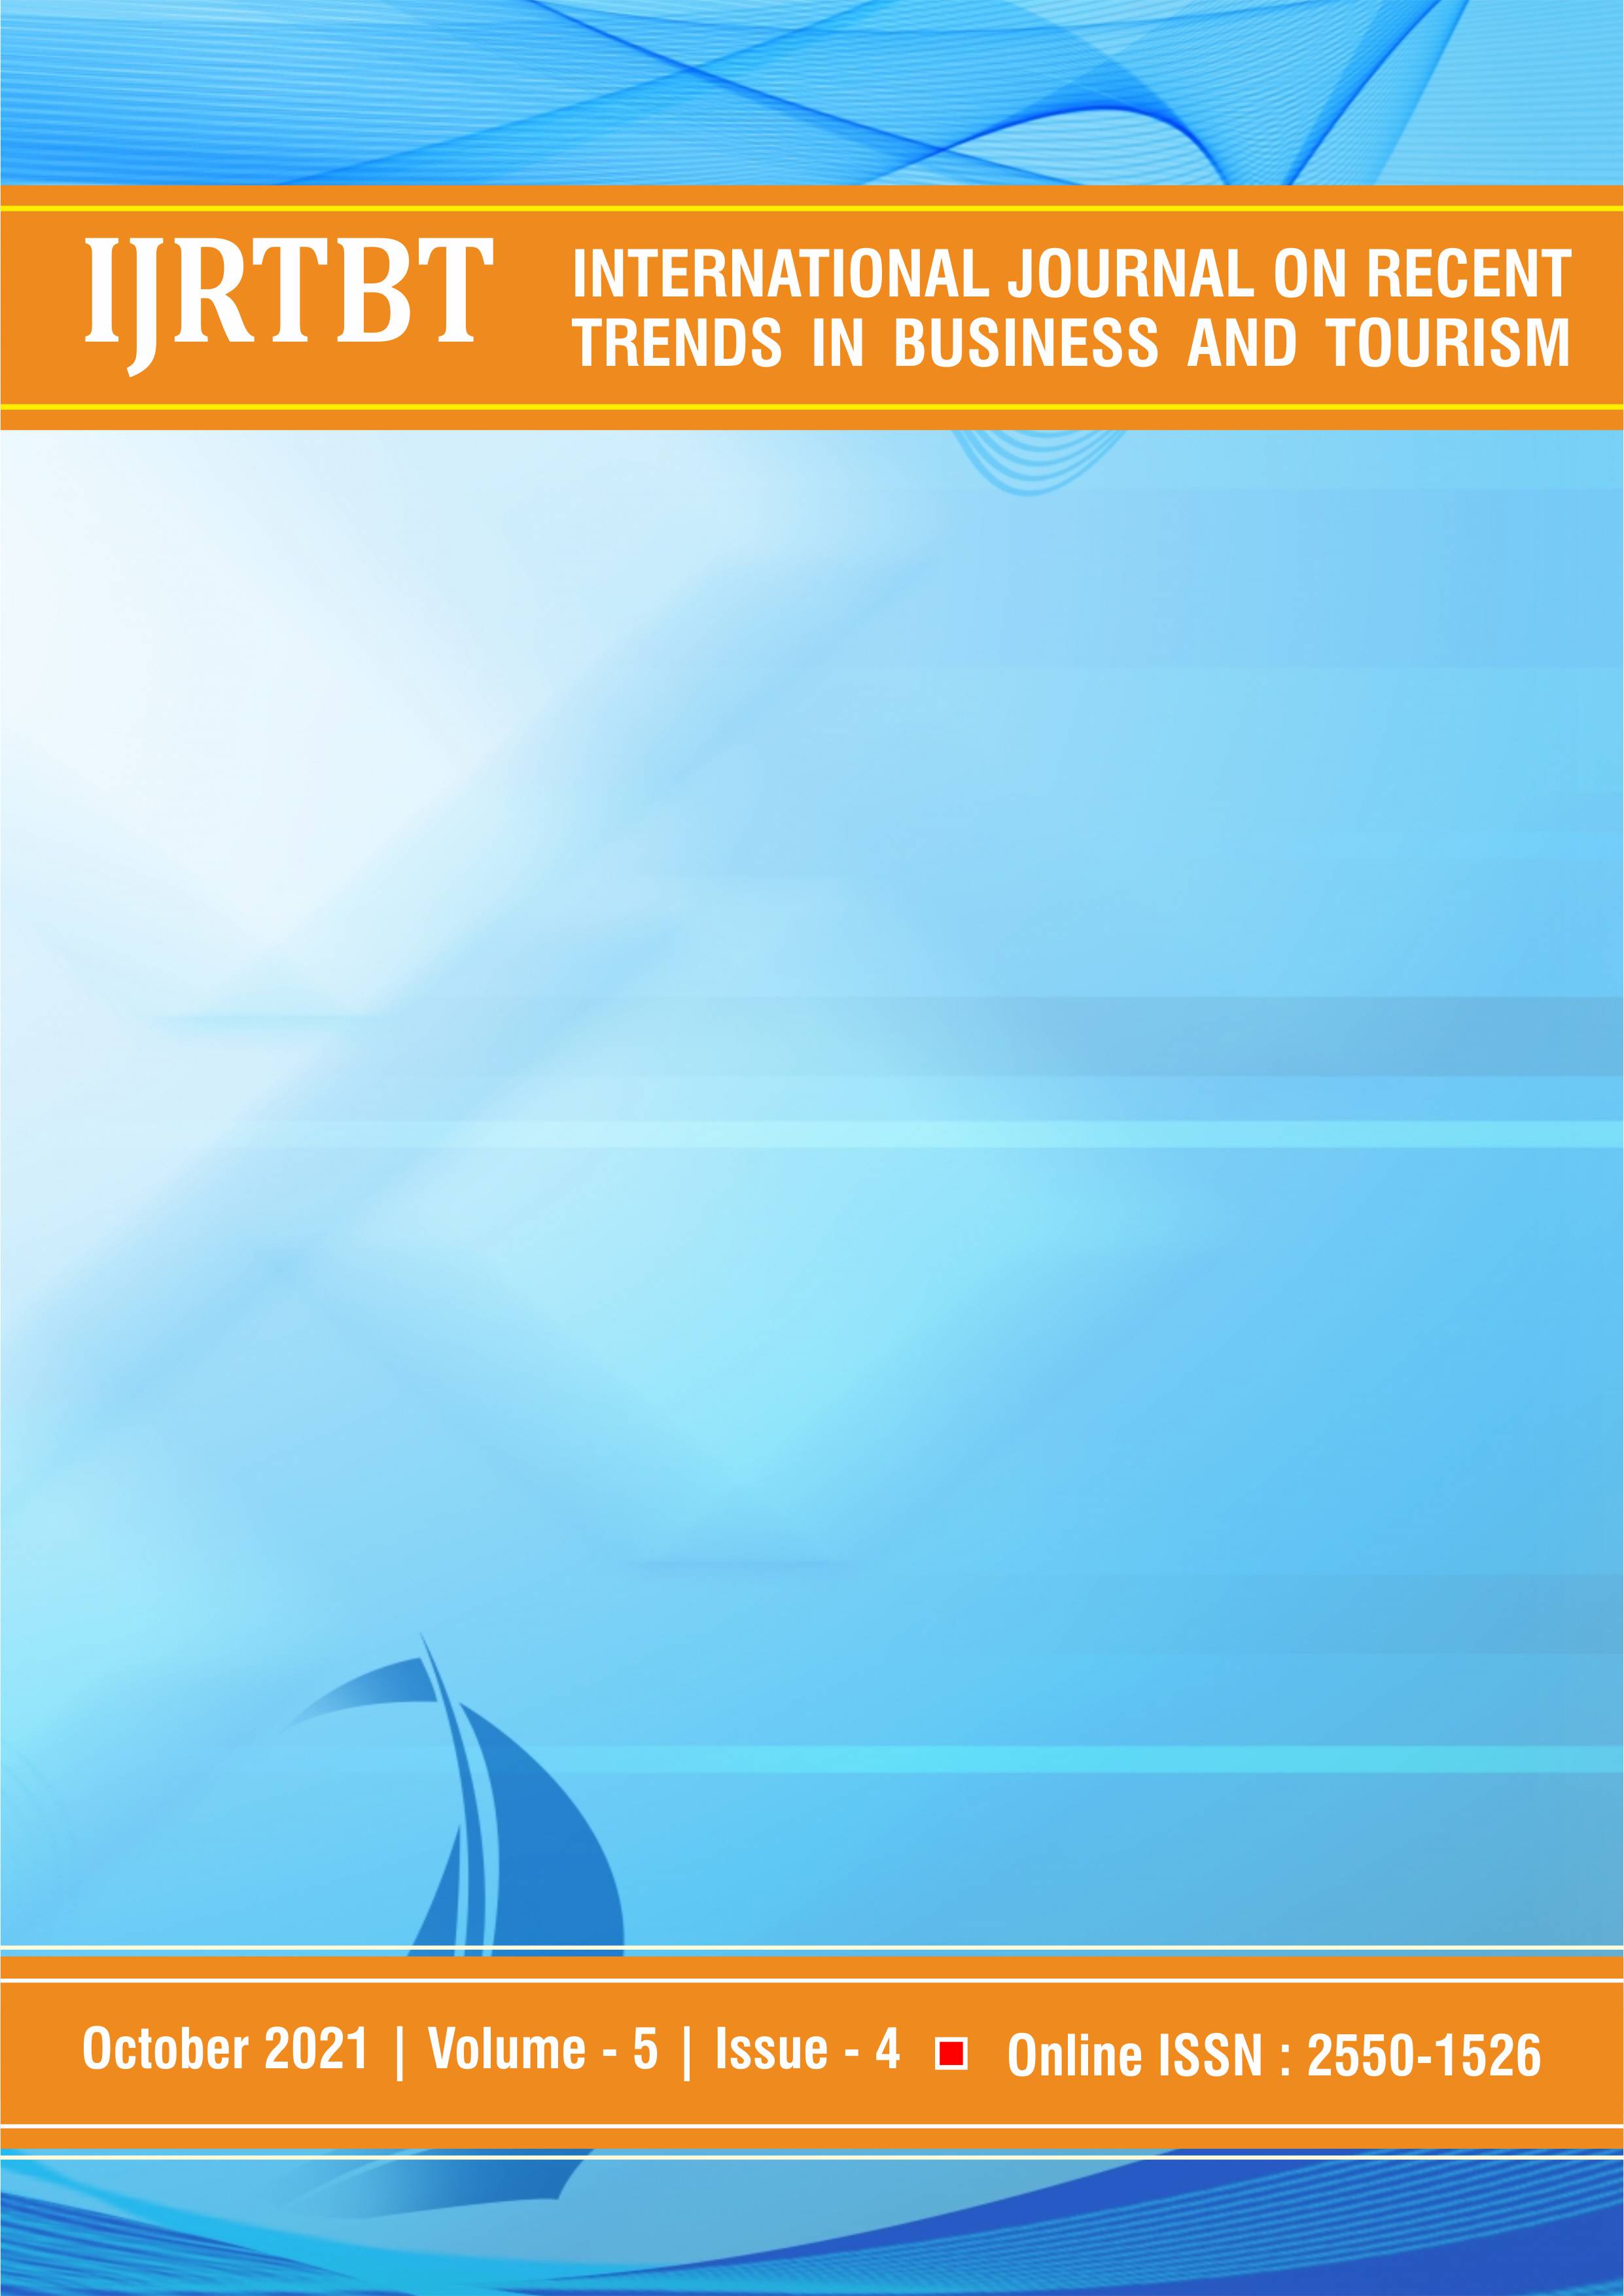 					View Vol. 5 No. 4 (2021): International Journal on Recent Trends in Business and Tourism
				